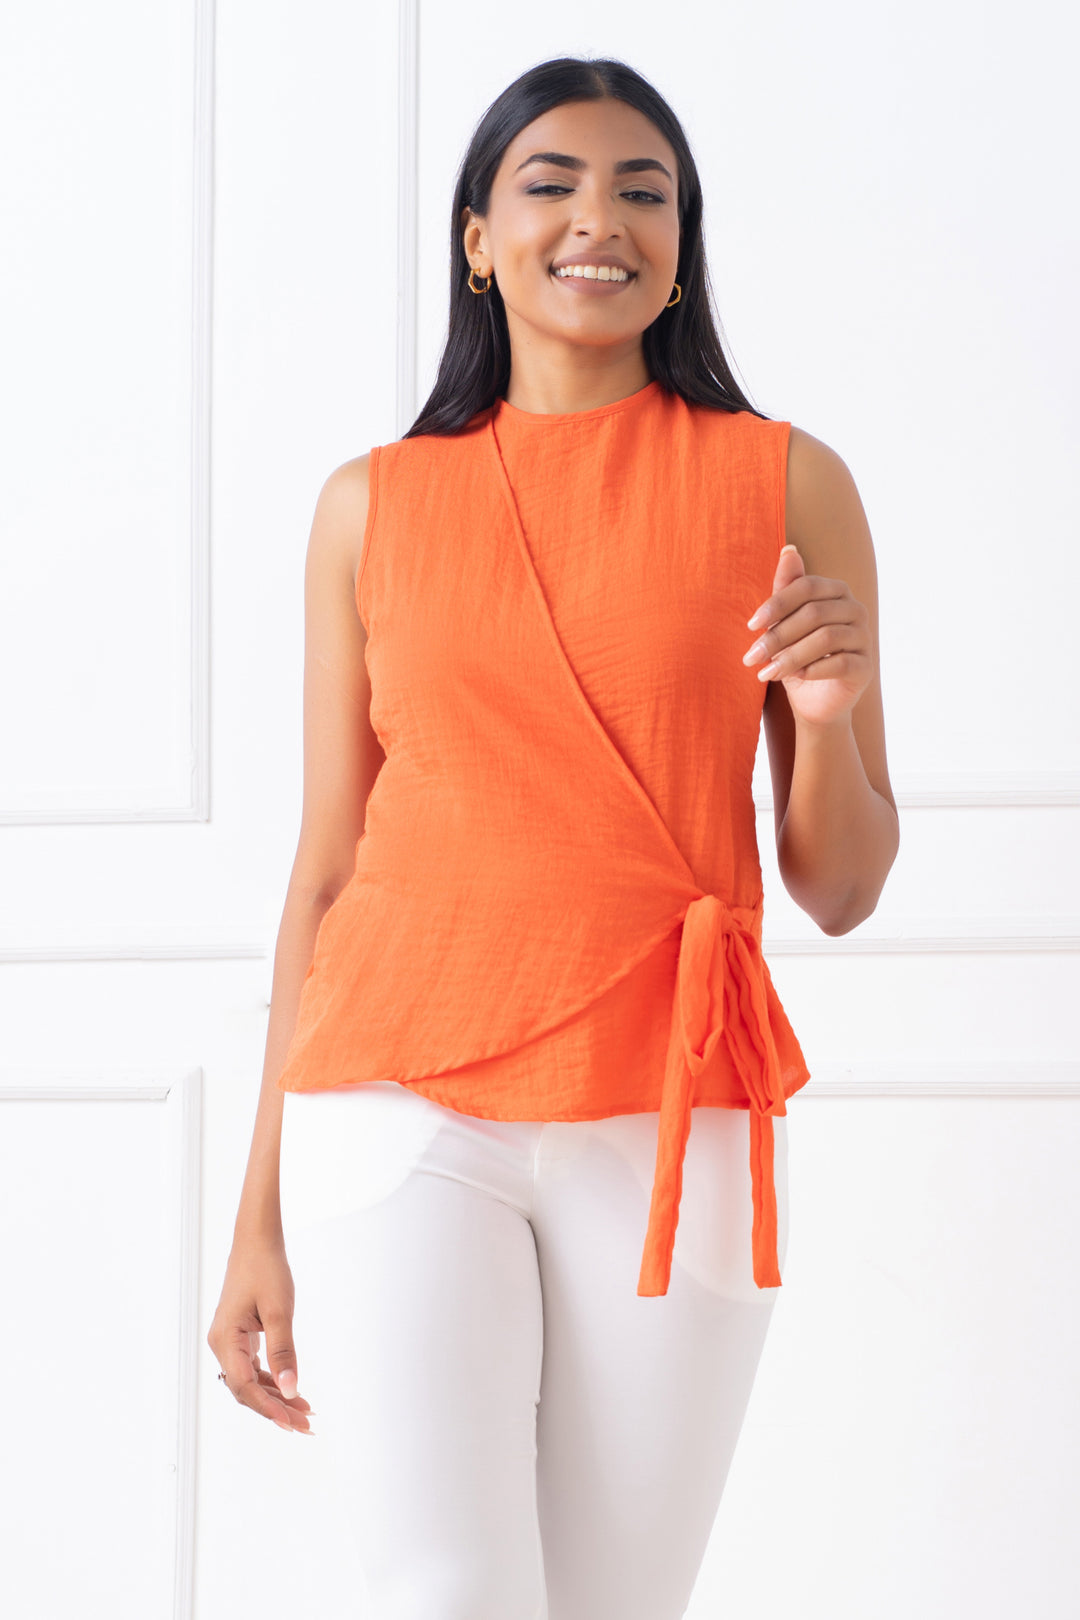 Orange Wrap Top - Slim Fit, Top, New Arrivals, Round Neck, Sleeveless, Slim Fit, Smart Casual, Smart Casual Top, Wrap Top - MONDY, Sri Lankan women's clothing office wear party dresses jacket